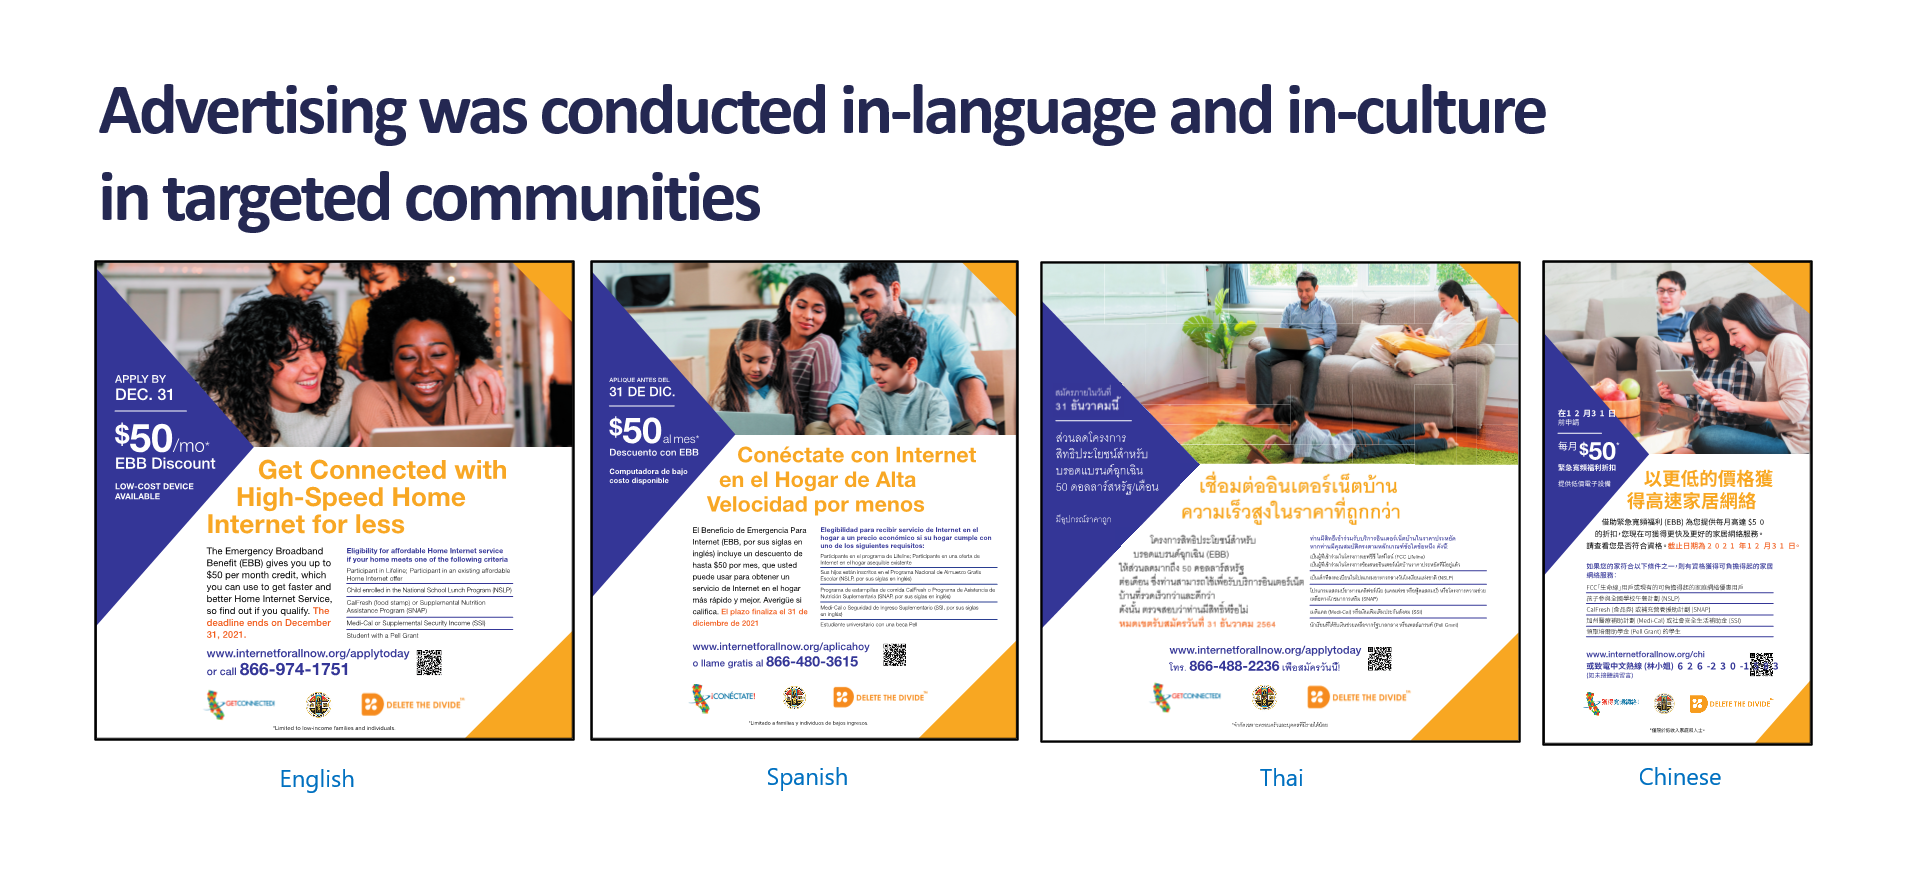 Advertising was conducted in-language and in-culture in targeted communities. Images of four fliers in English, Spanish, Thai and Chinese.